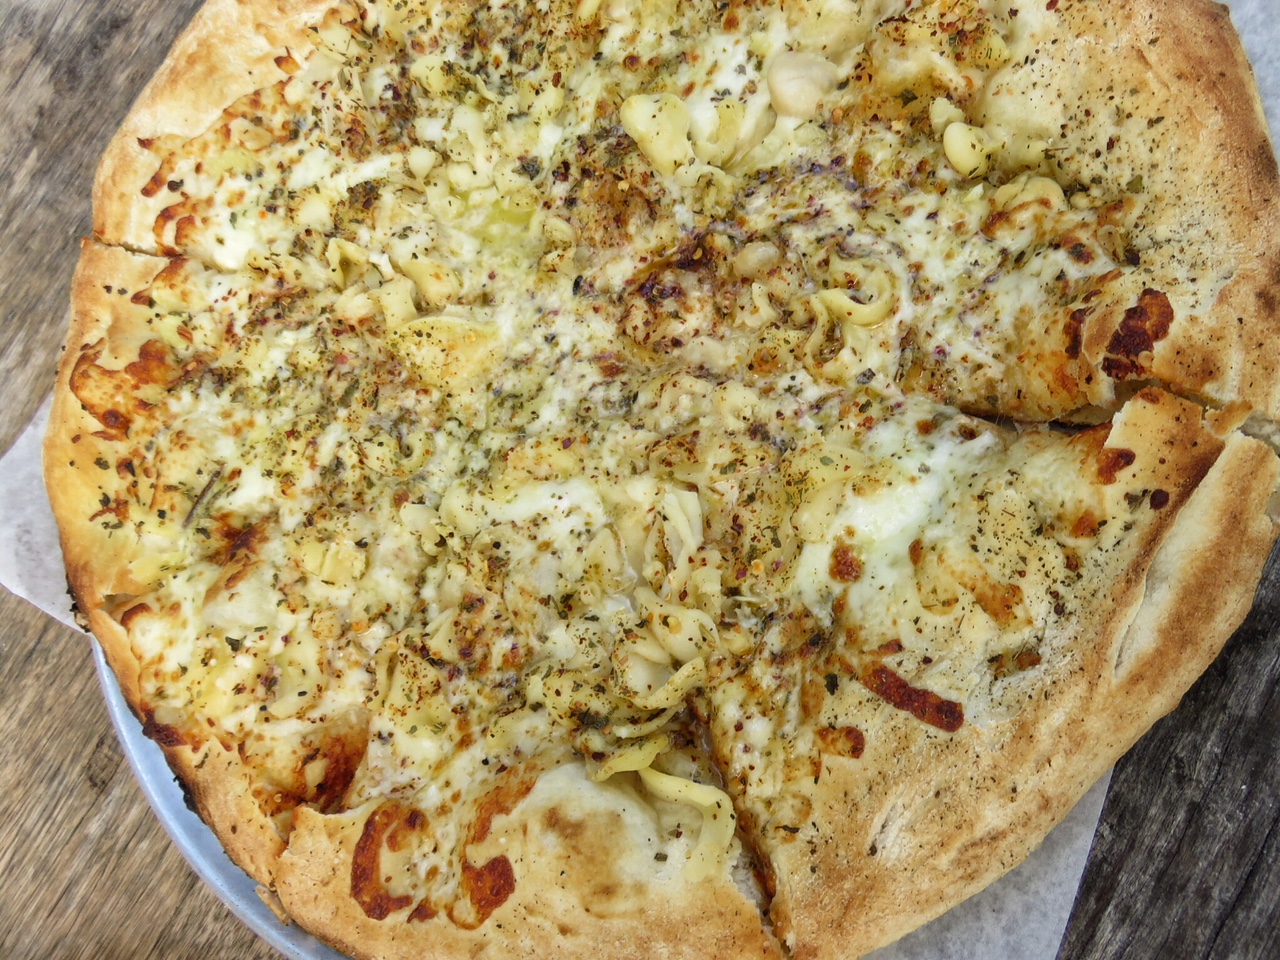 Conch pizza at the Truck Stop